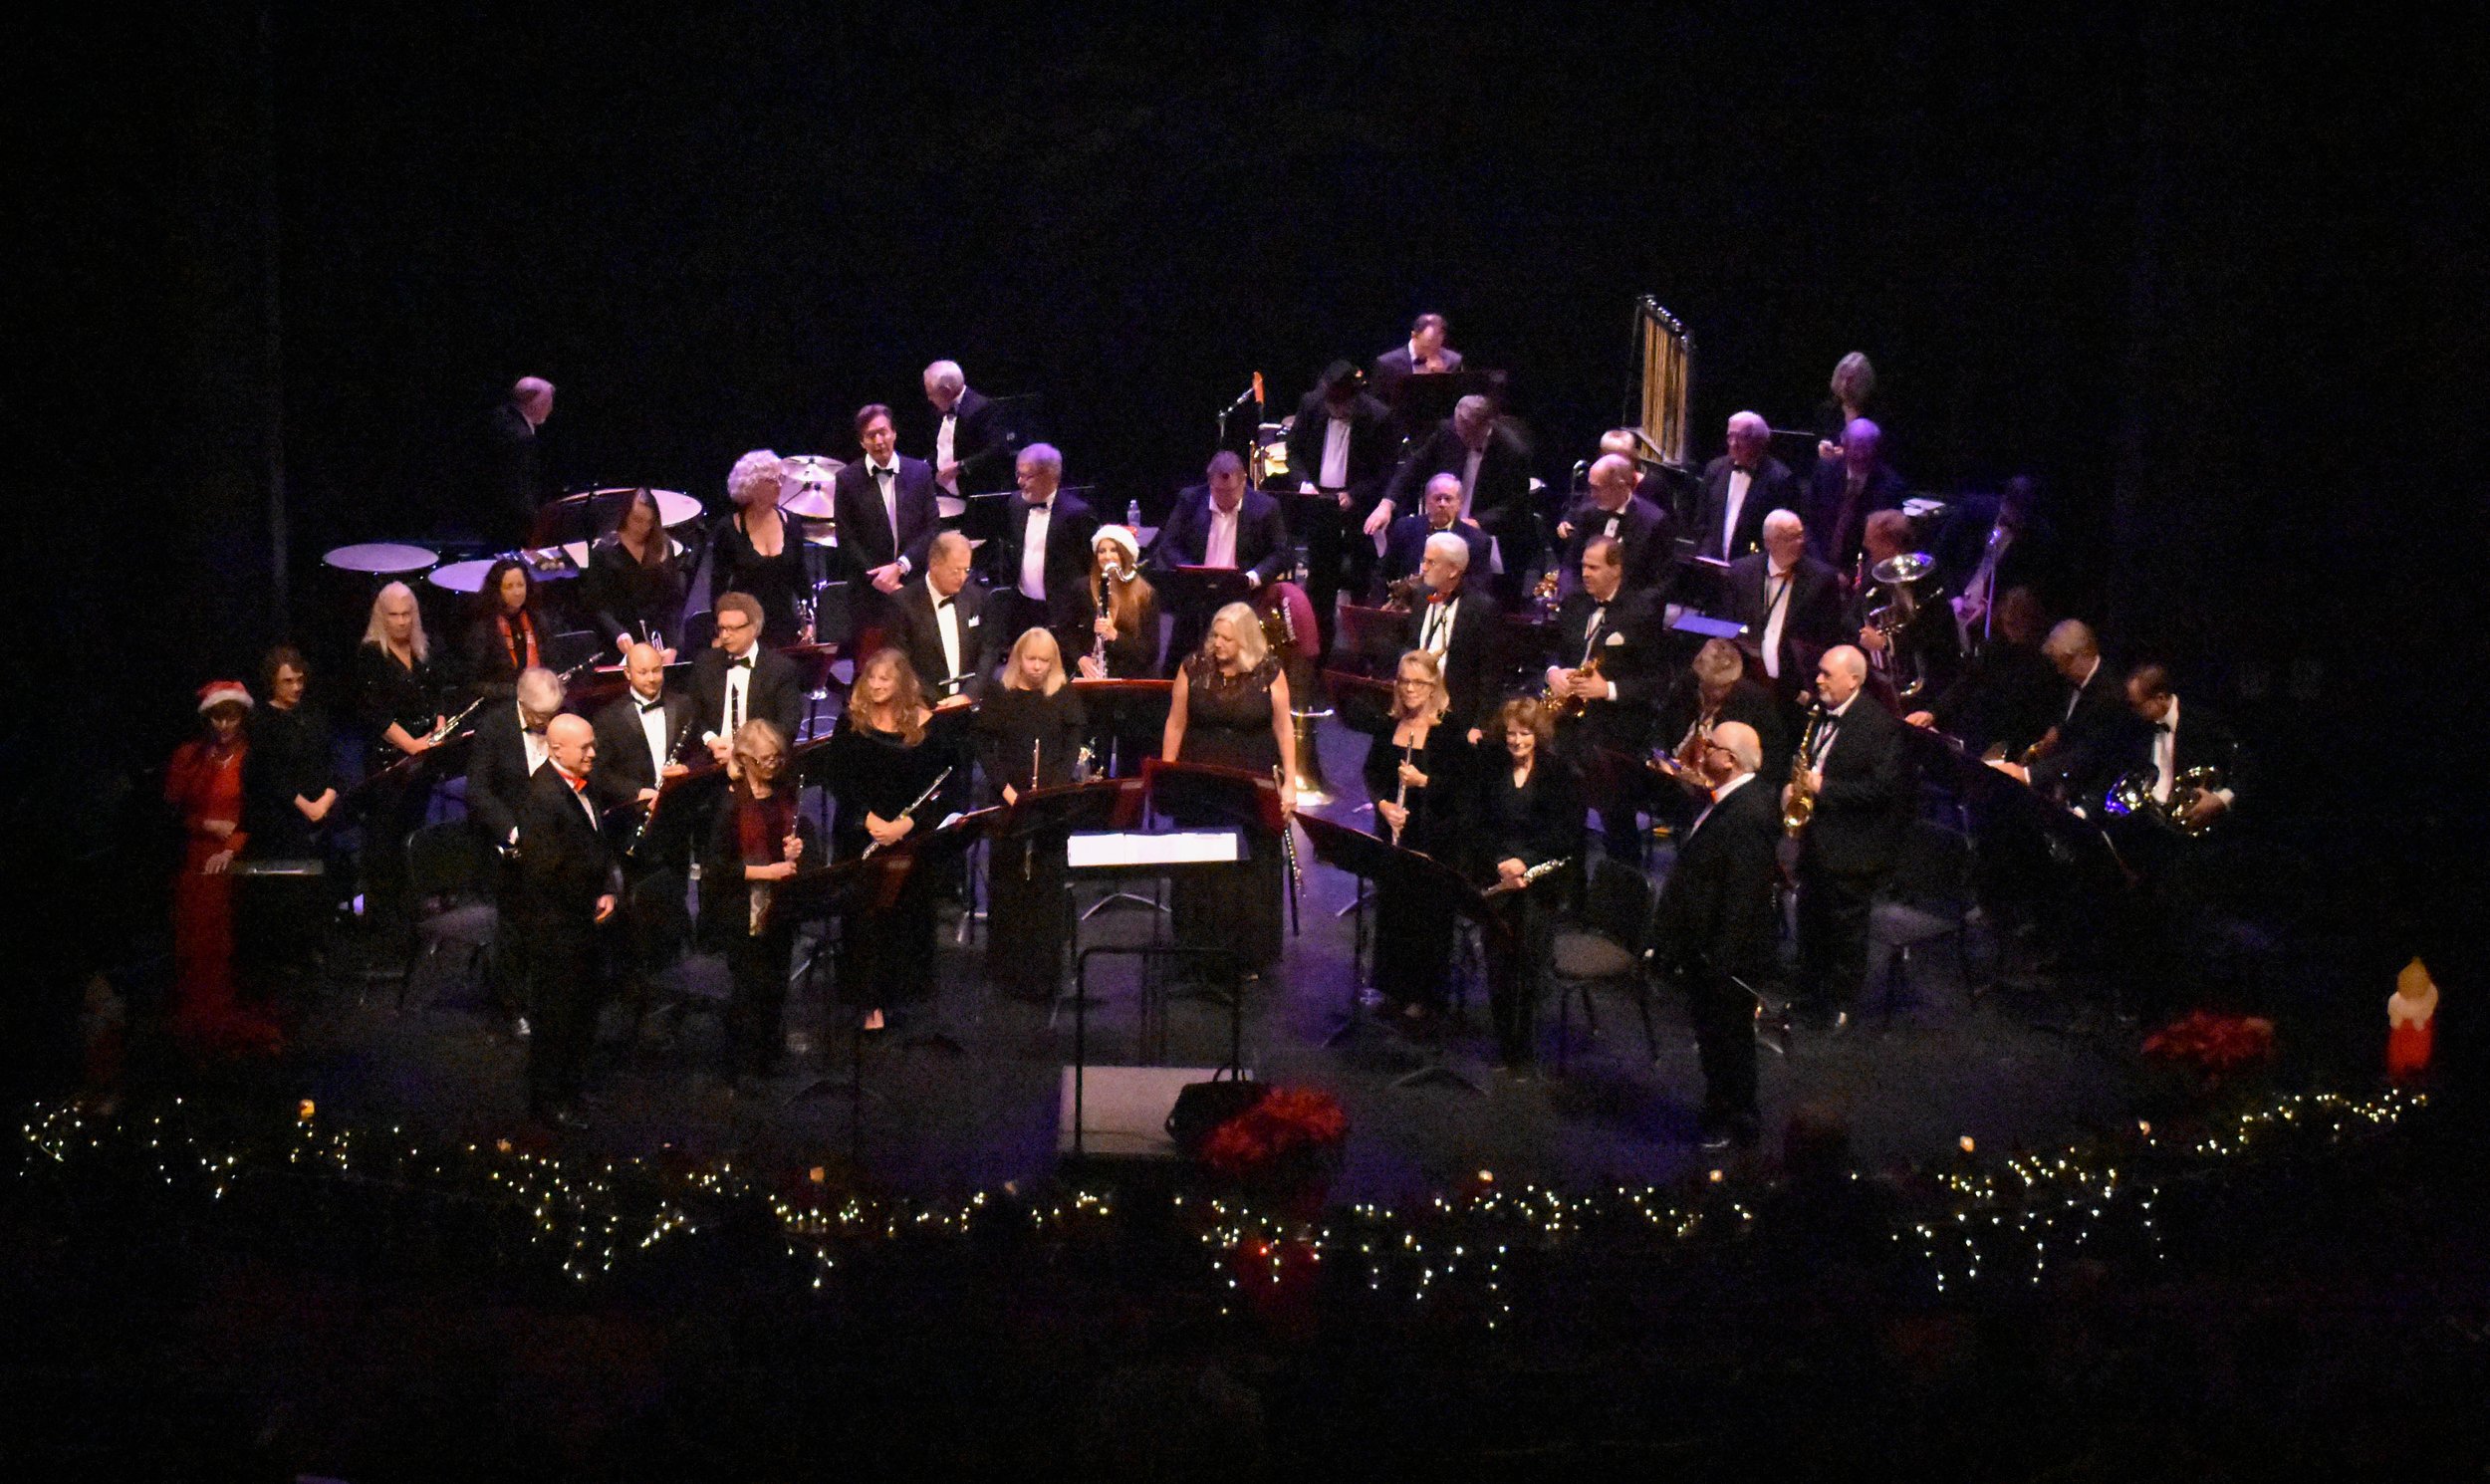 12-19-2021 LCB Holiday Concert by Peyton Webster80-35.jpg